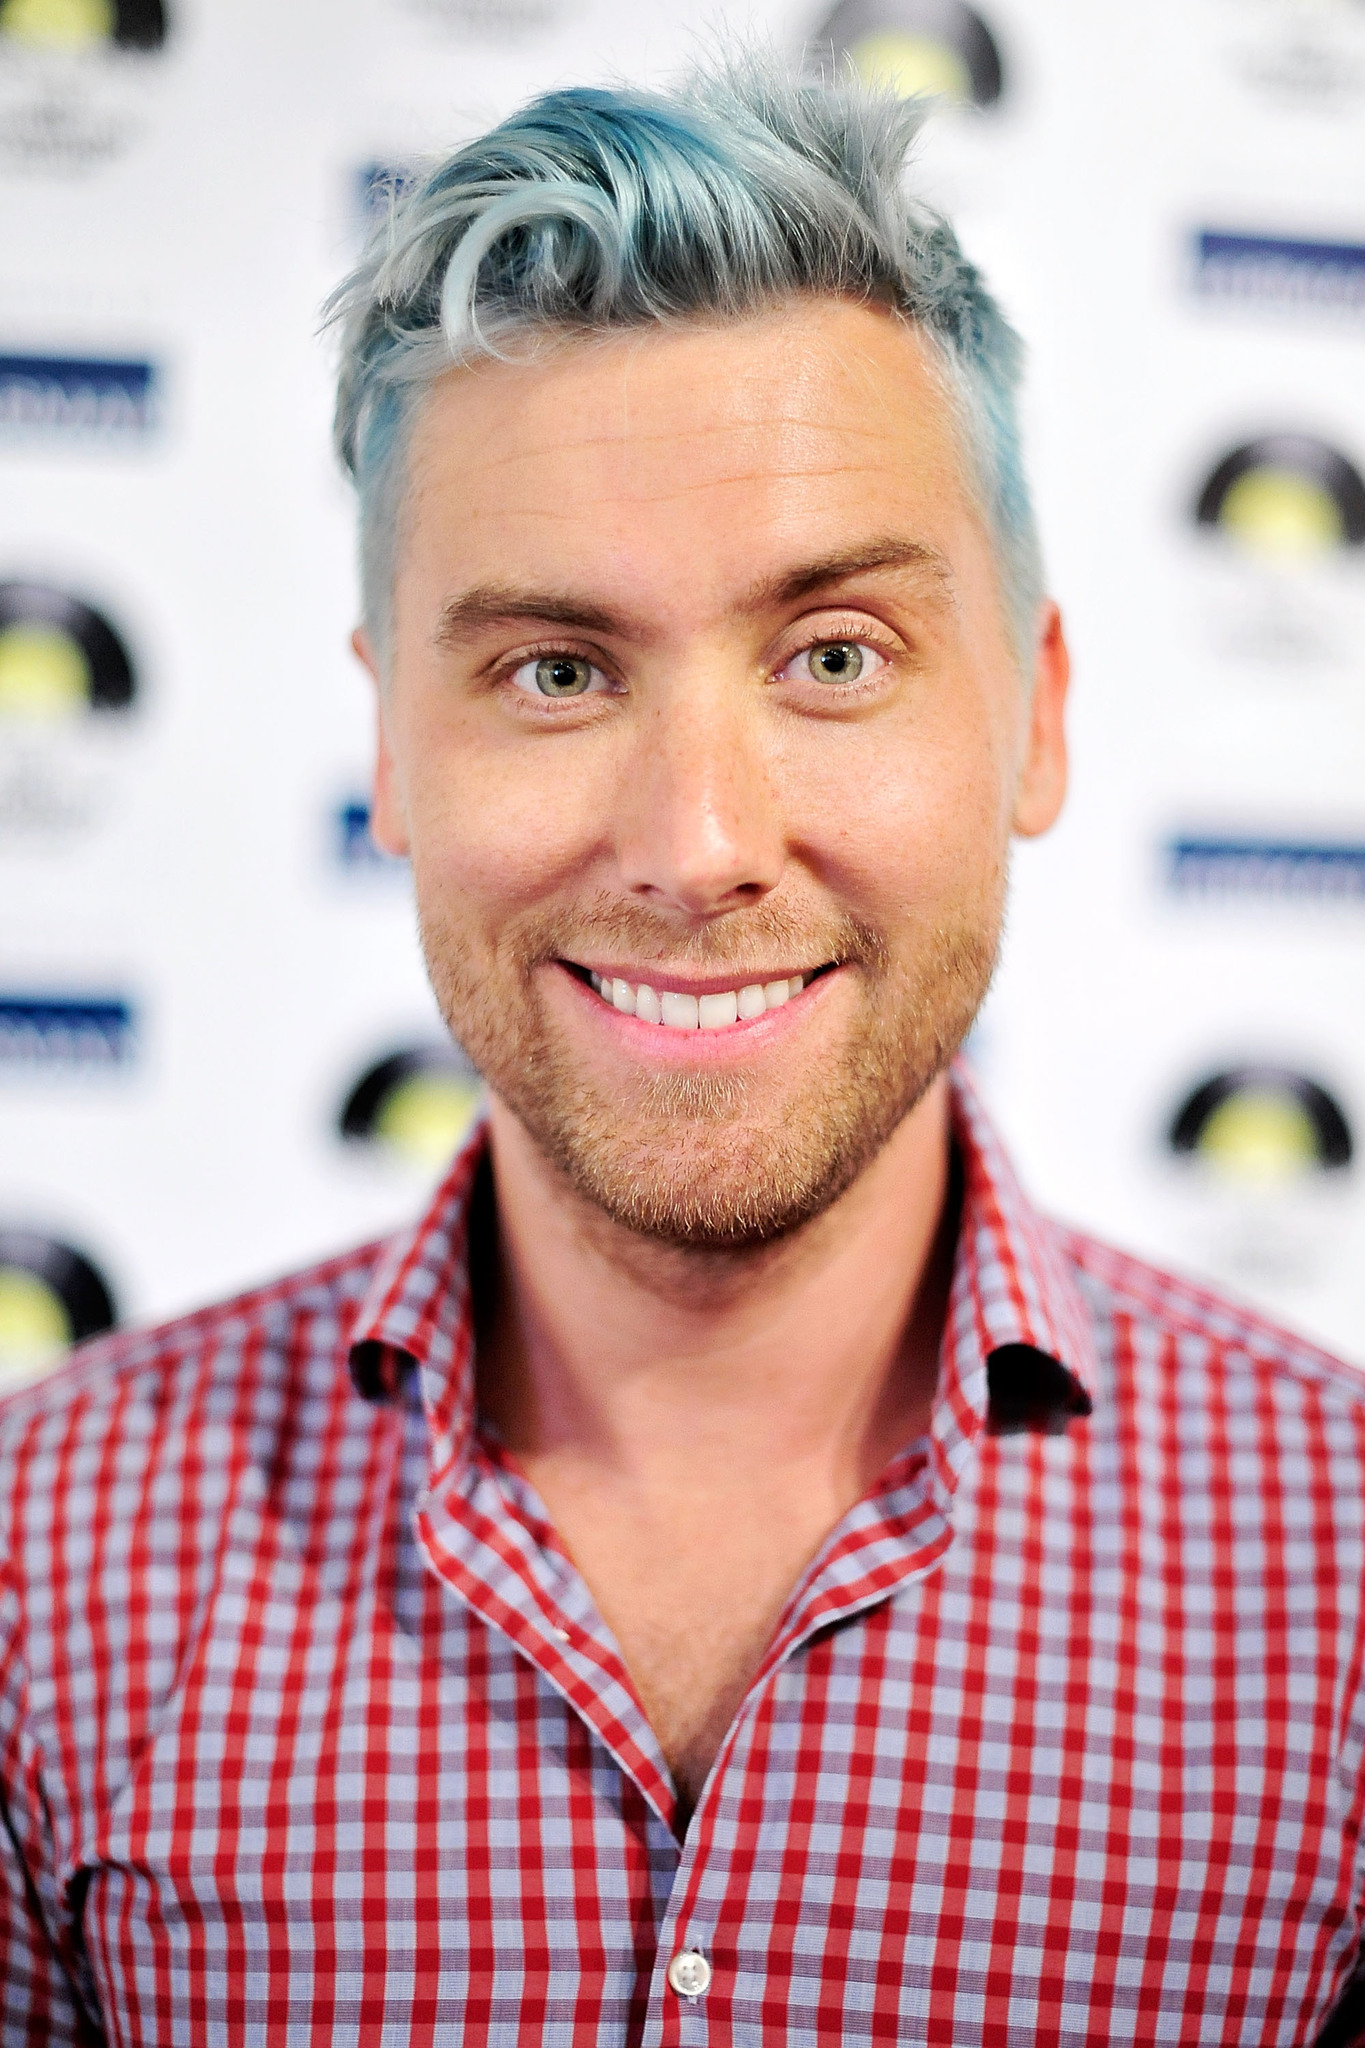 Lance Bass attends the Los Angeles Premiere of 'The Distortion of Sound' at The GRAMMY Museum on July 10, 2014 in Los Angeles, California.